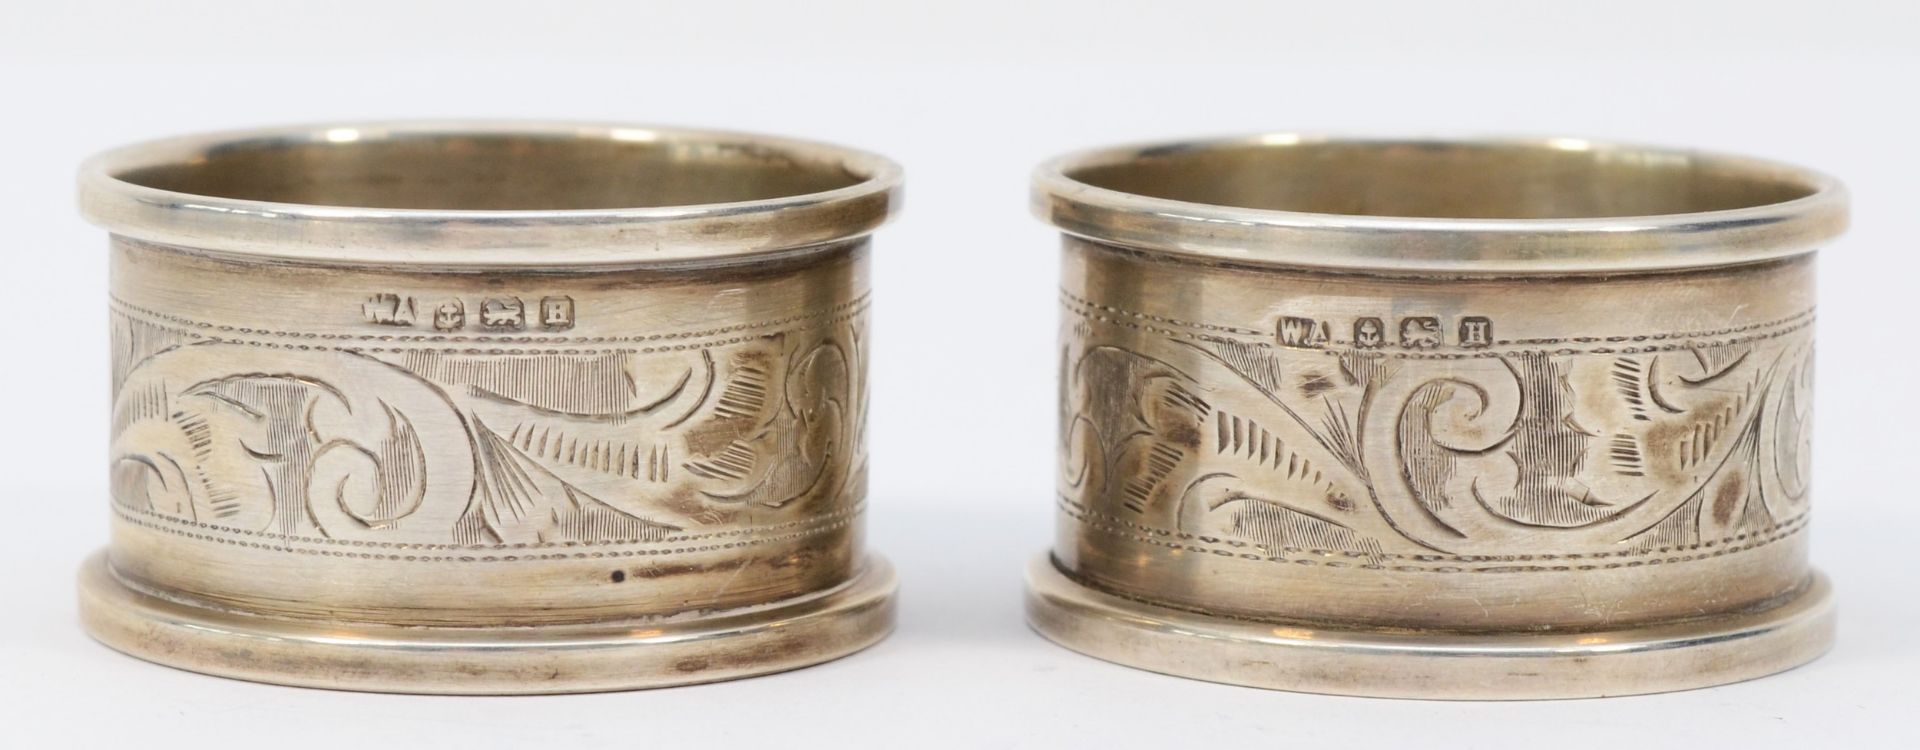 A pair of silver napkin rings, Birmingham 1932, both with E.M.B. initials and a metal Kings and - Image 2 of 3